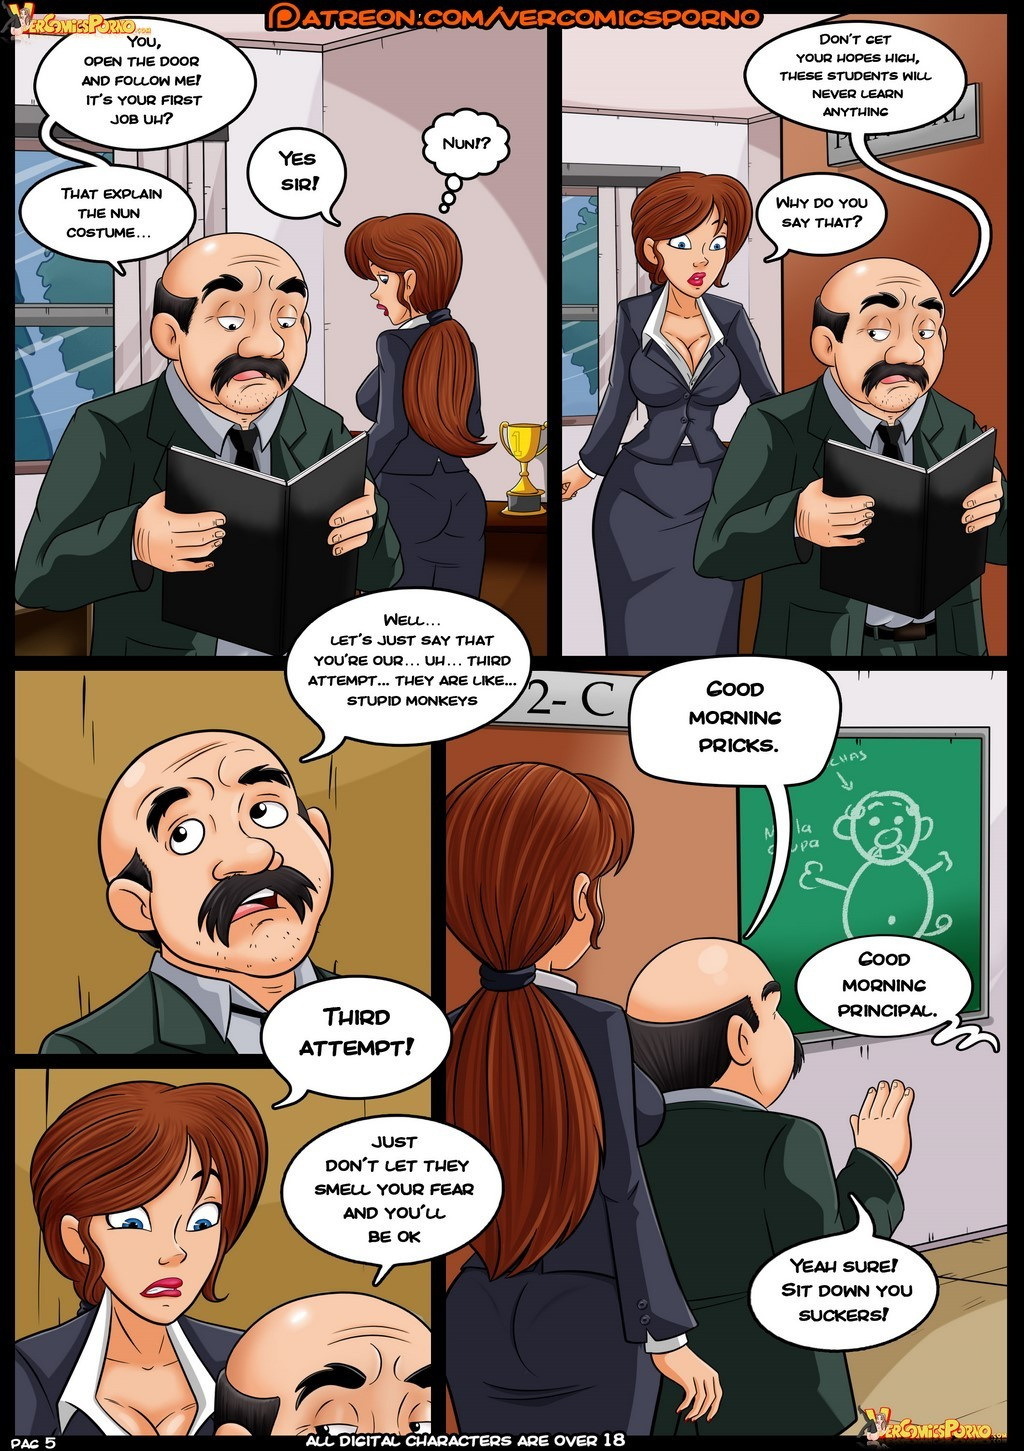 Valery Chronicles - Page 6